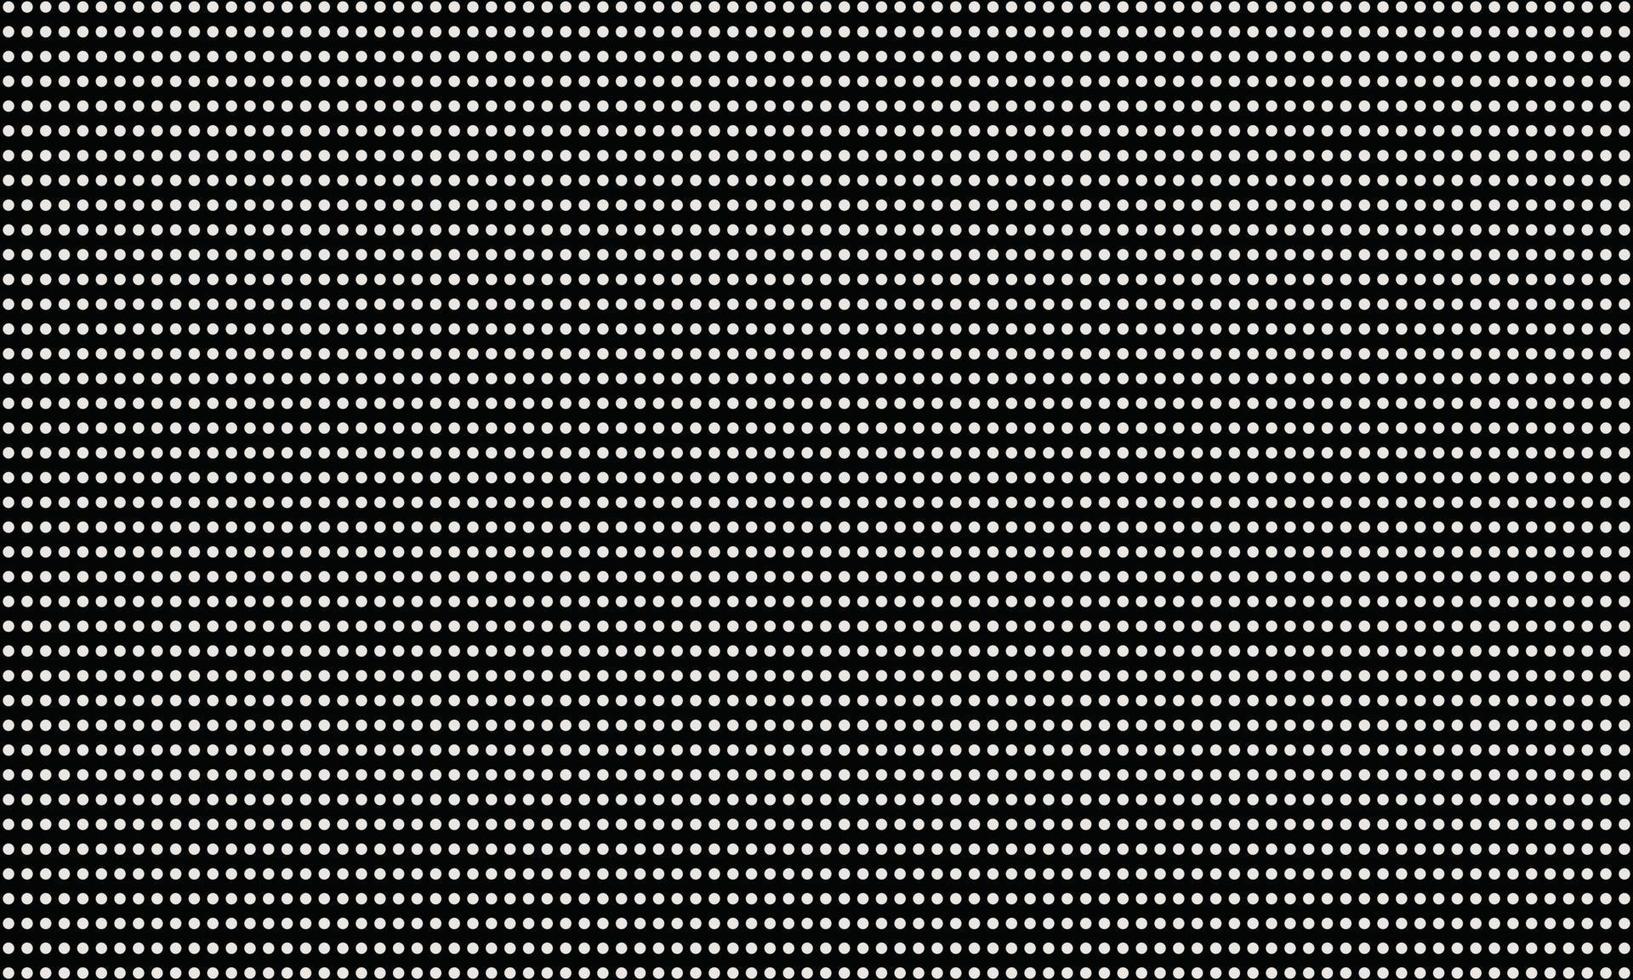 Stainless steel or metal plate texture background White dots on black background. Distressed halftone vector texture.